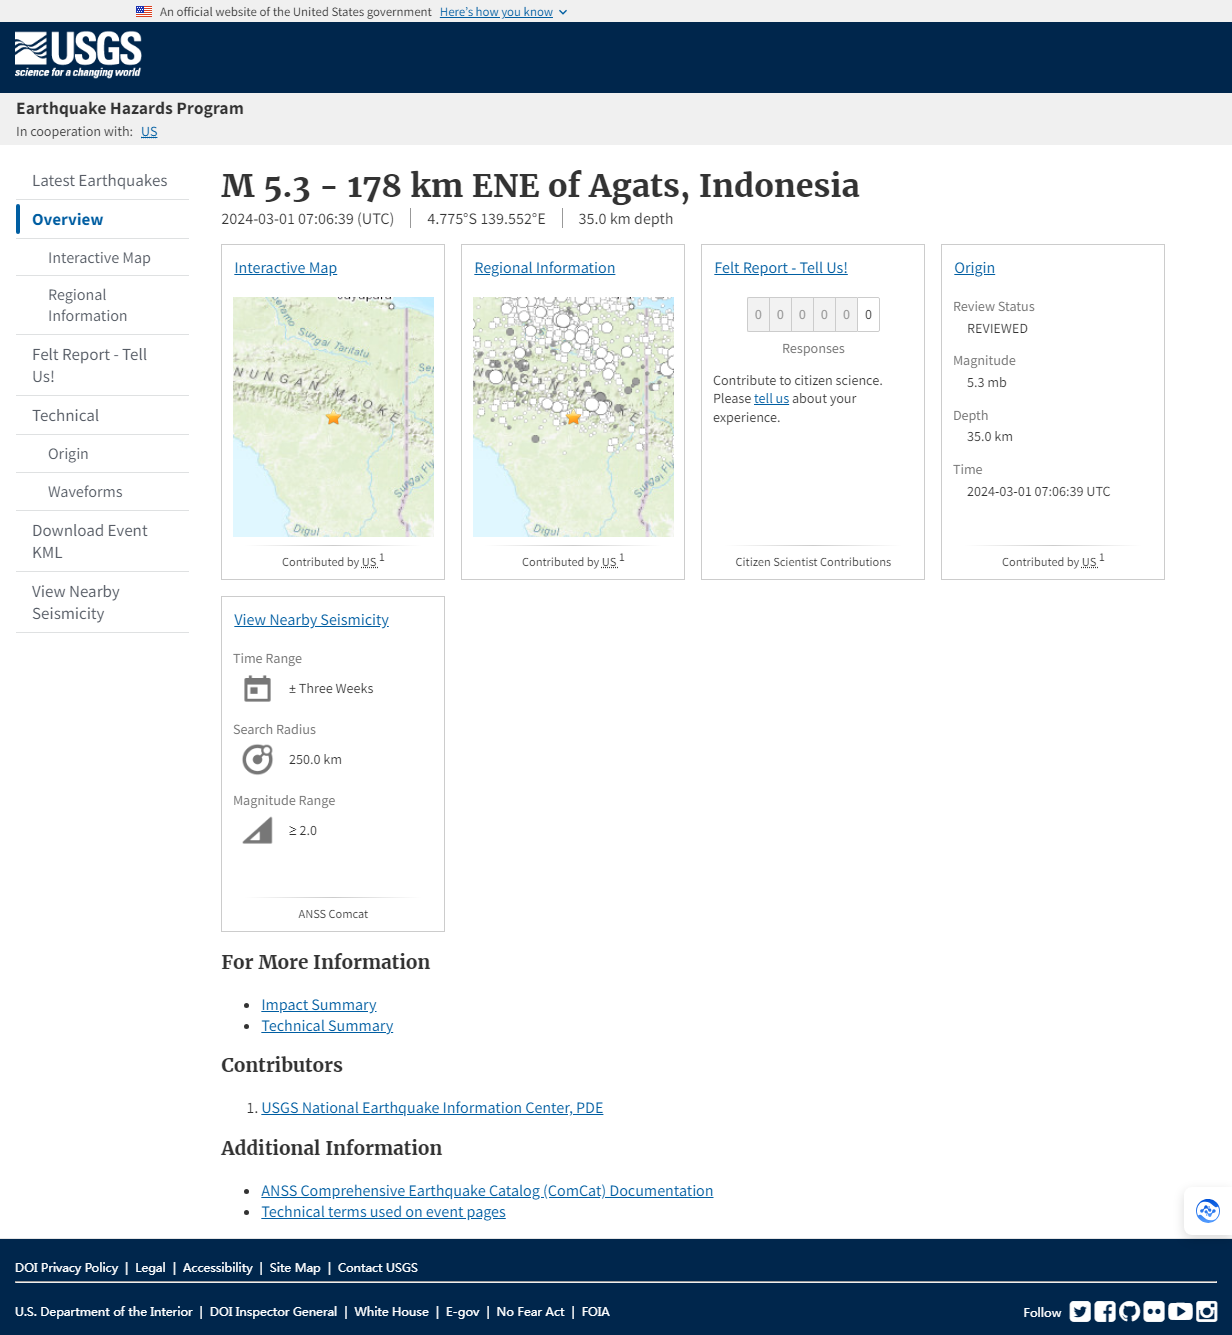 M 5.3 - 178 km ENE of Agats, Indonesia.png